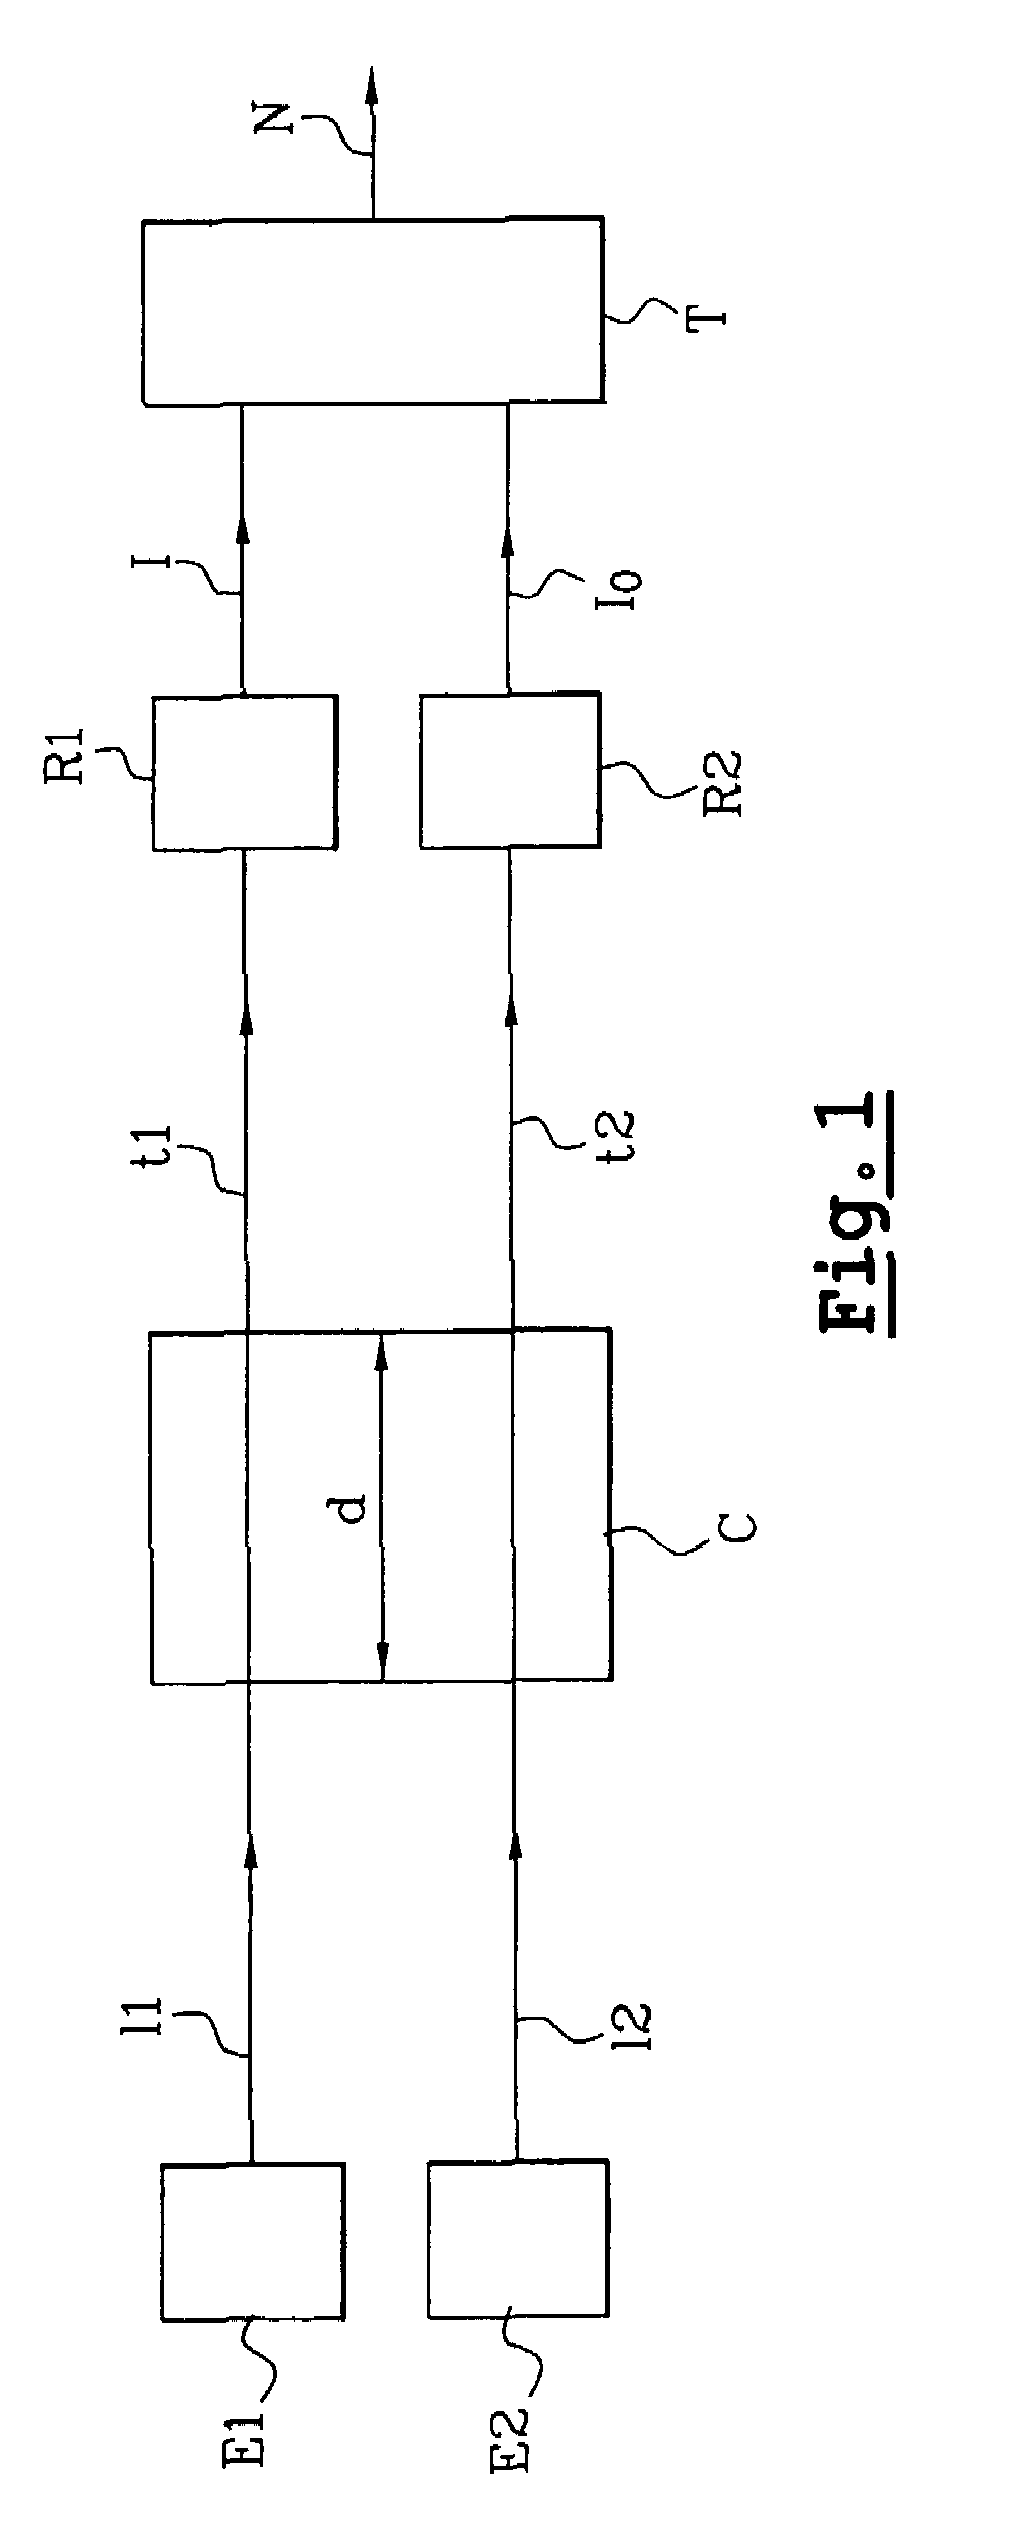 Device for measuring gas concentration having dual emitter